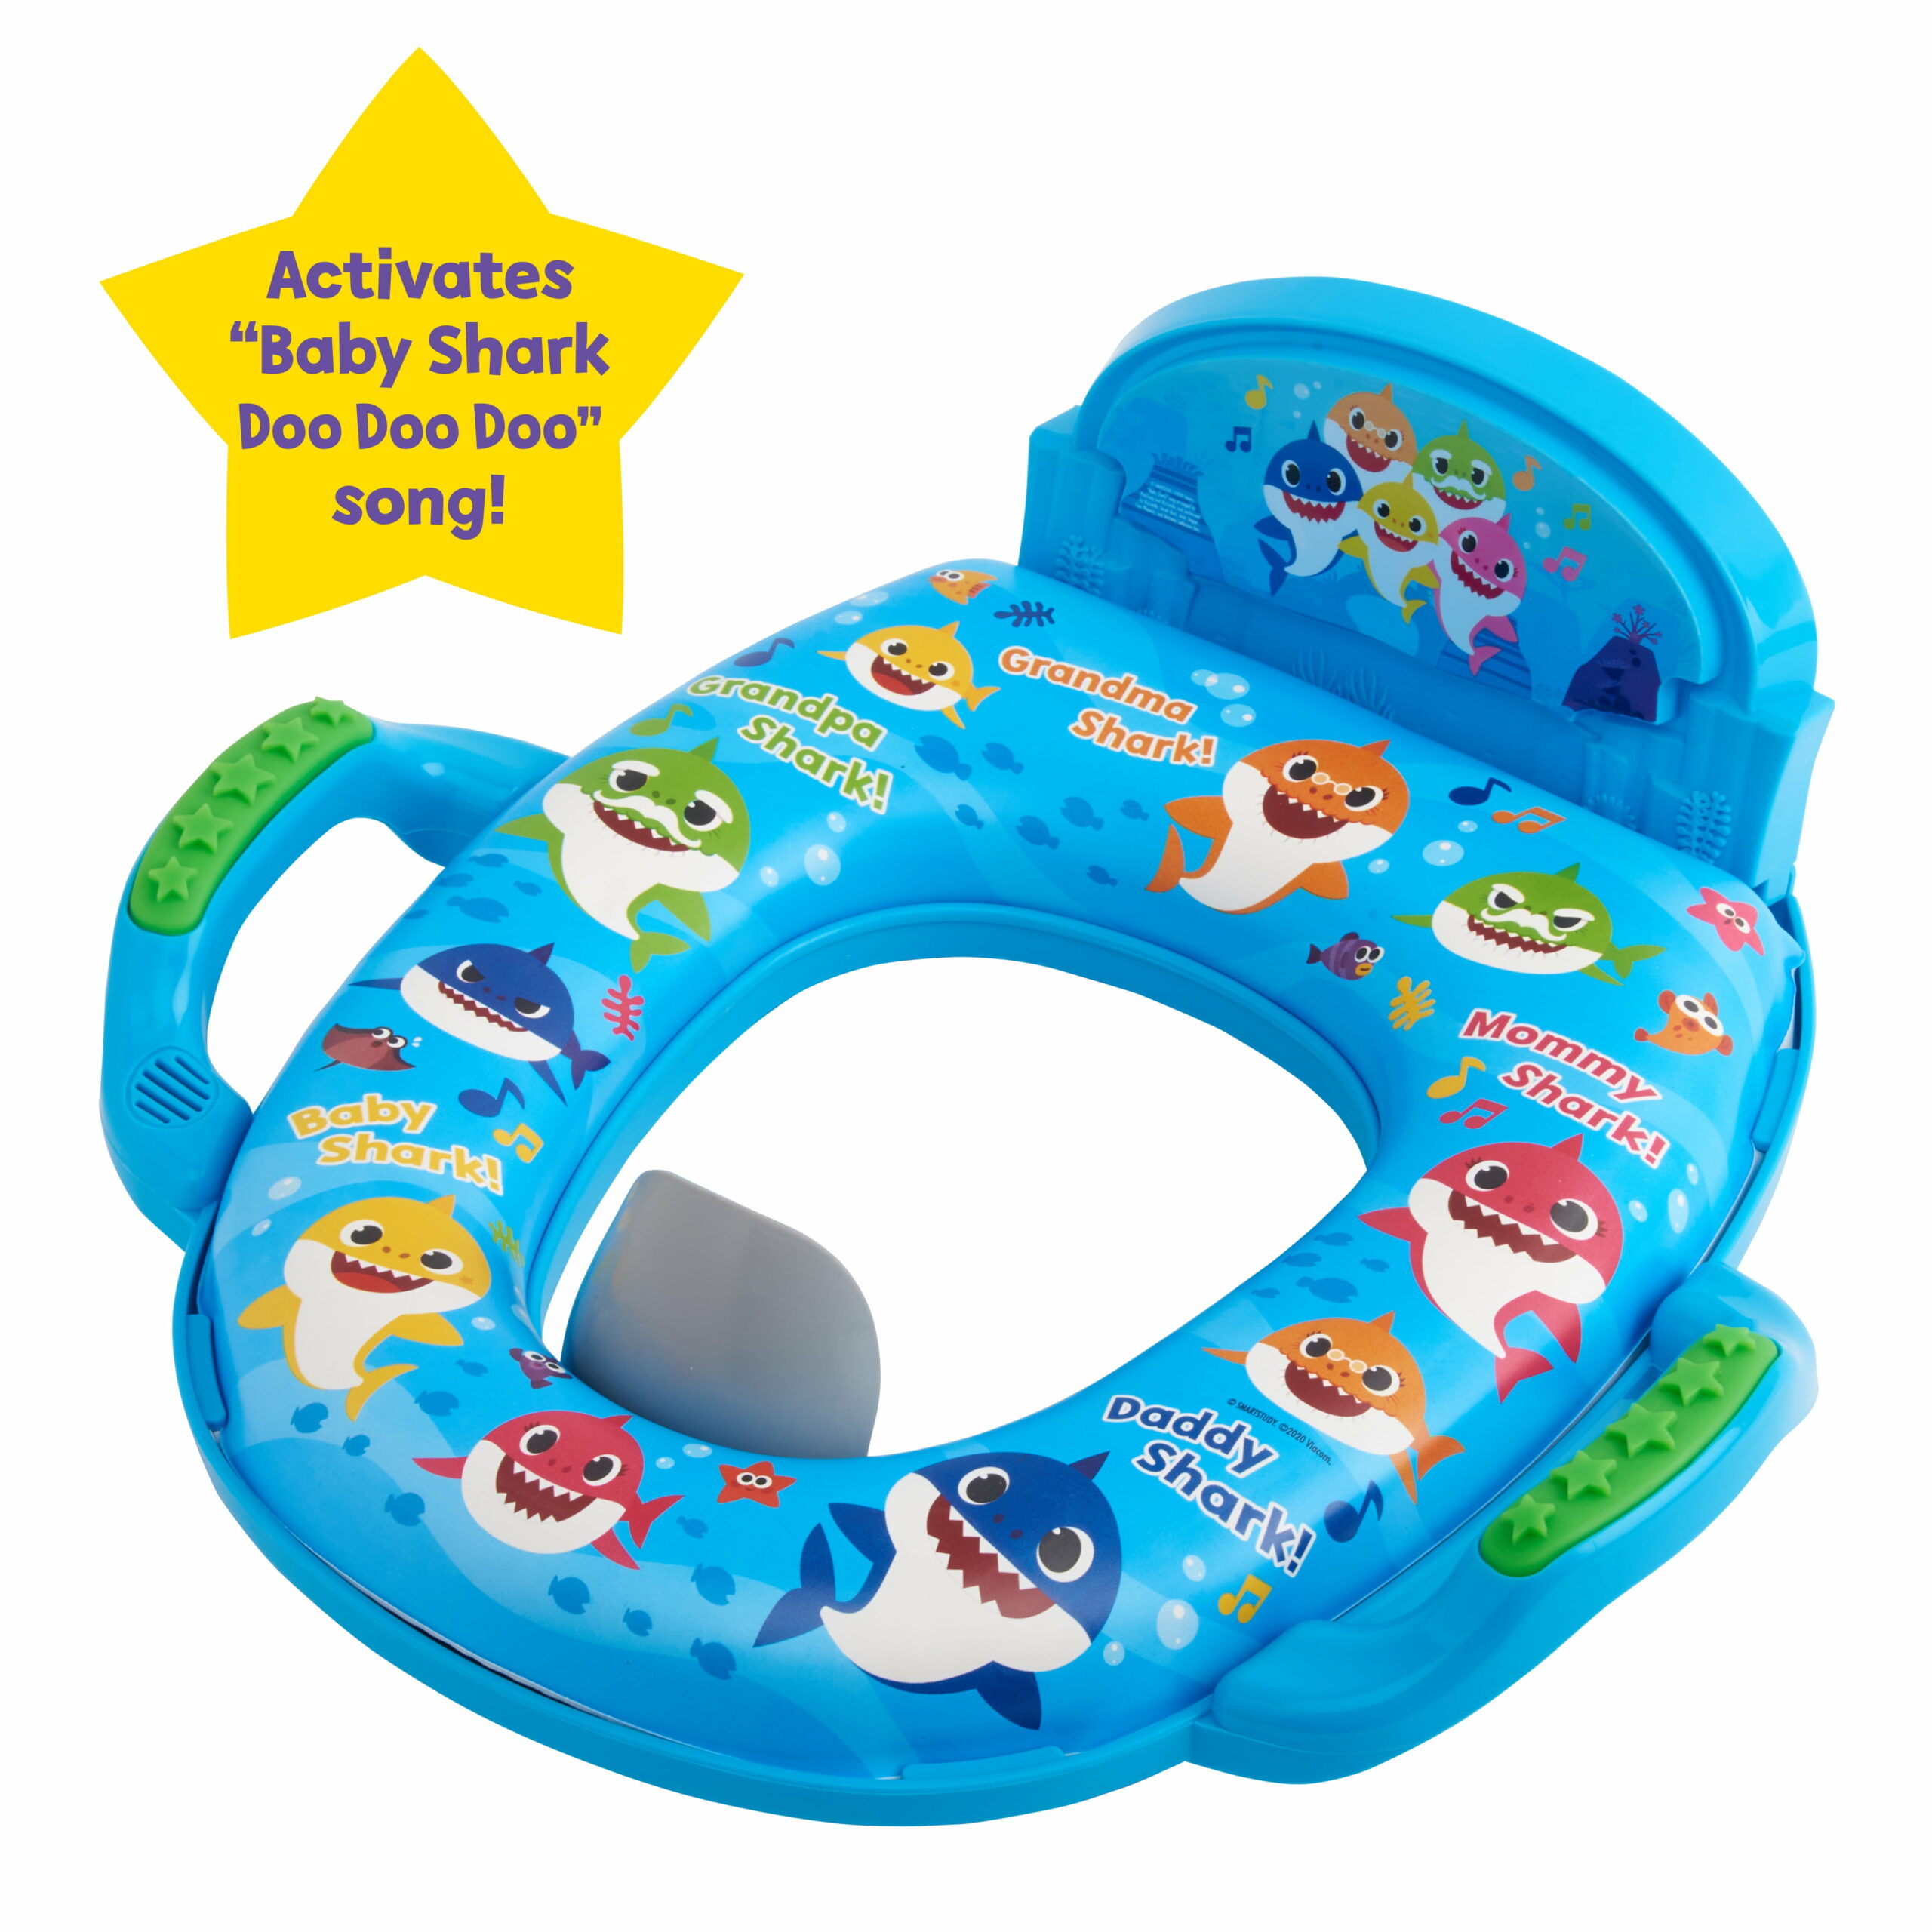 baby toilet seat shark tank Baby shark "fintastic" deluxe potty seat with sound